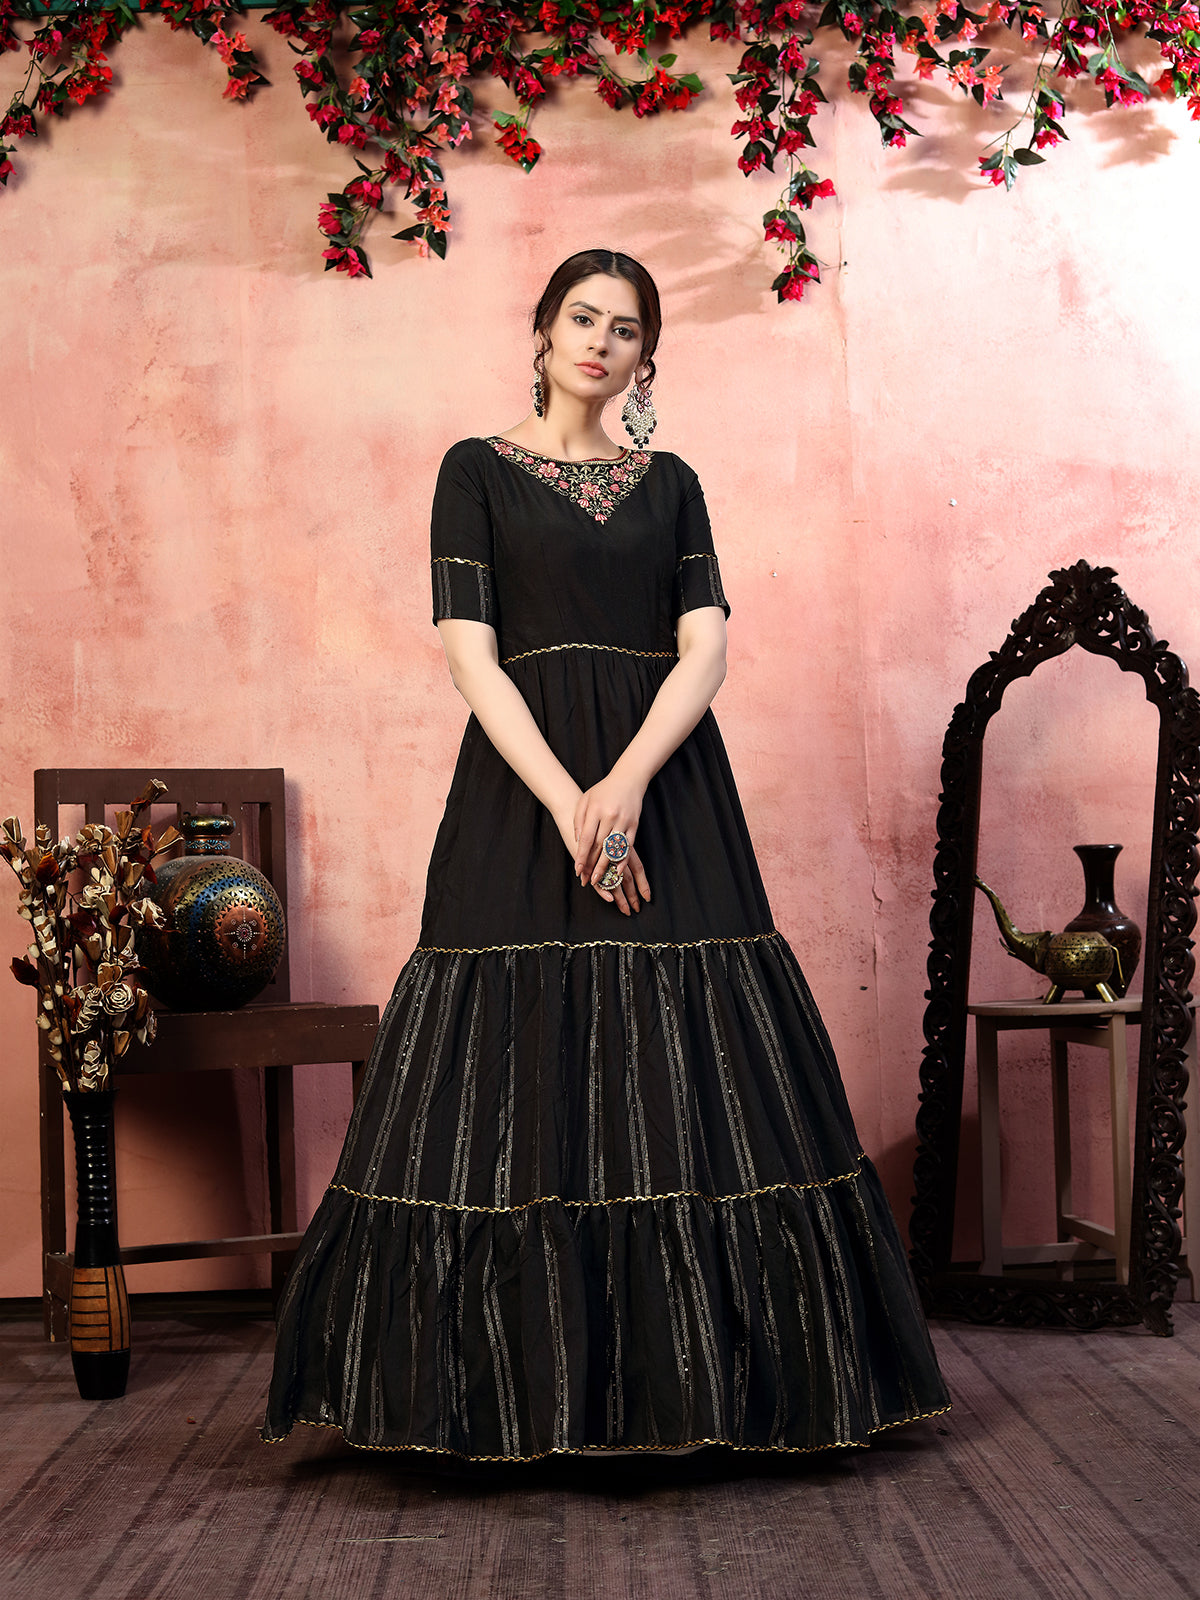 His Dark Queen - ~ Chapter -12 ~ | Indian gowns dresses, Black gown dress,  Fashion dresses